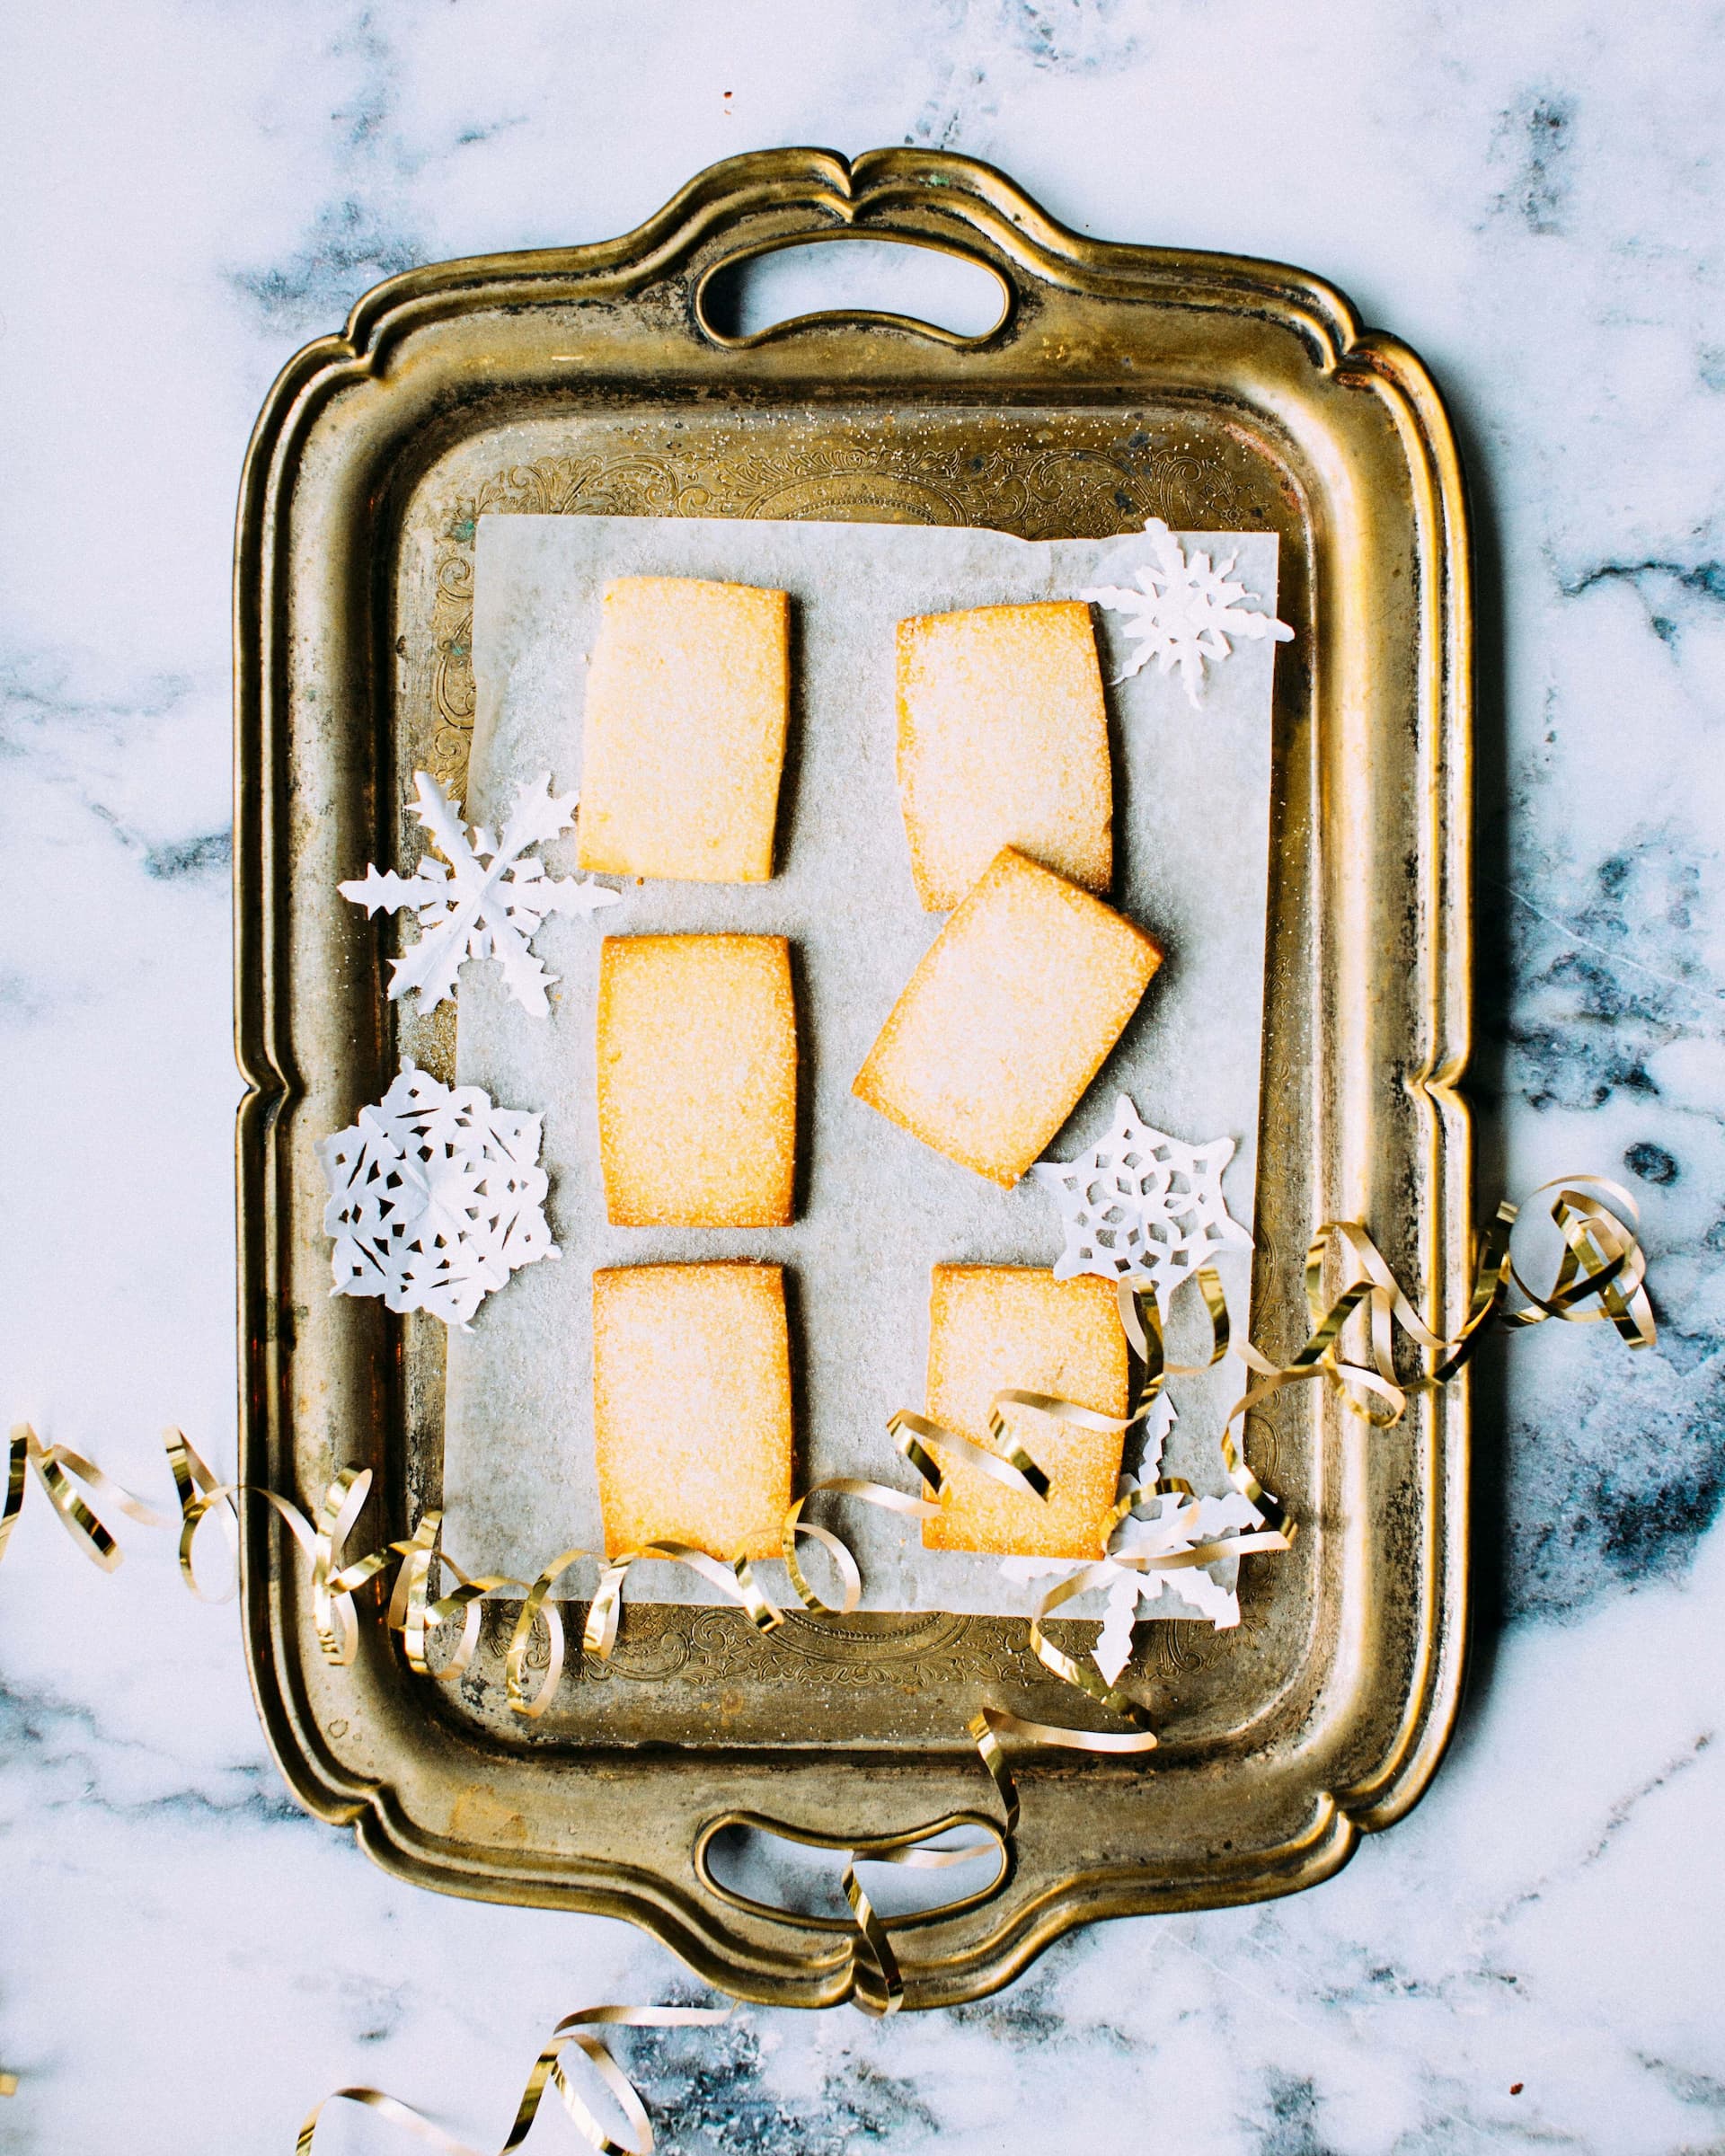 Single Malt Shortbread Biscuit Recipes That You Won’t Be Able to Get Enough Of